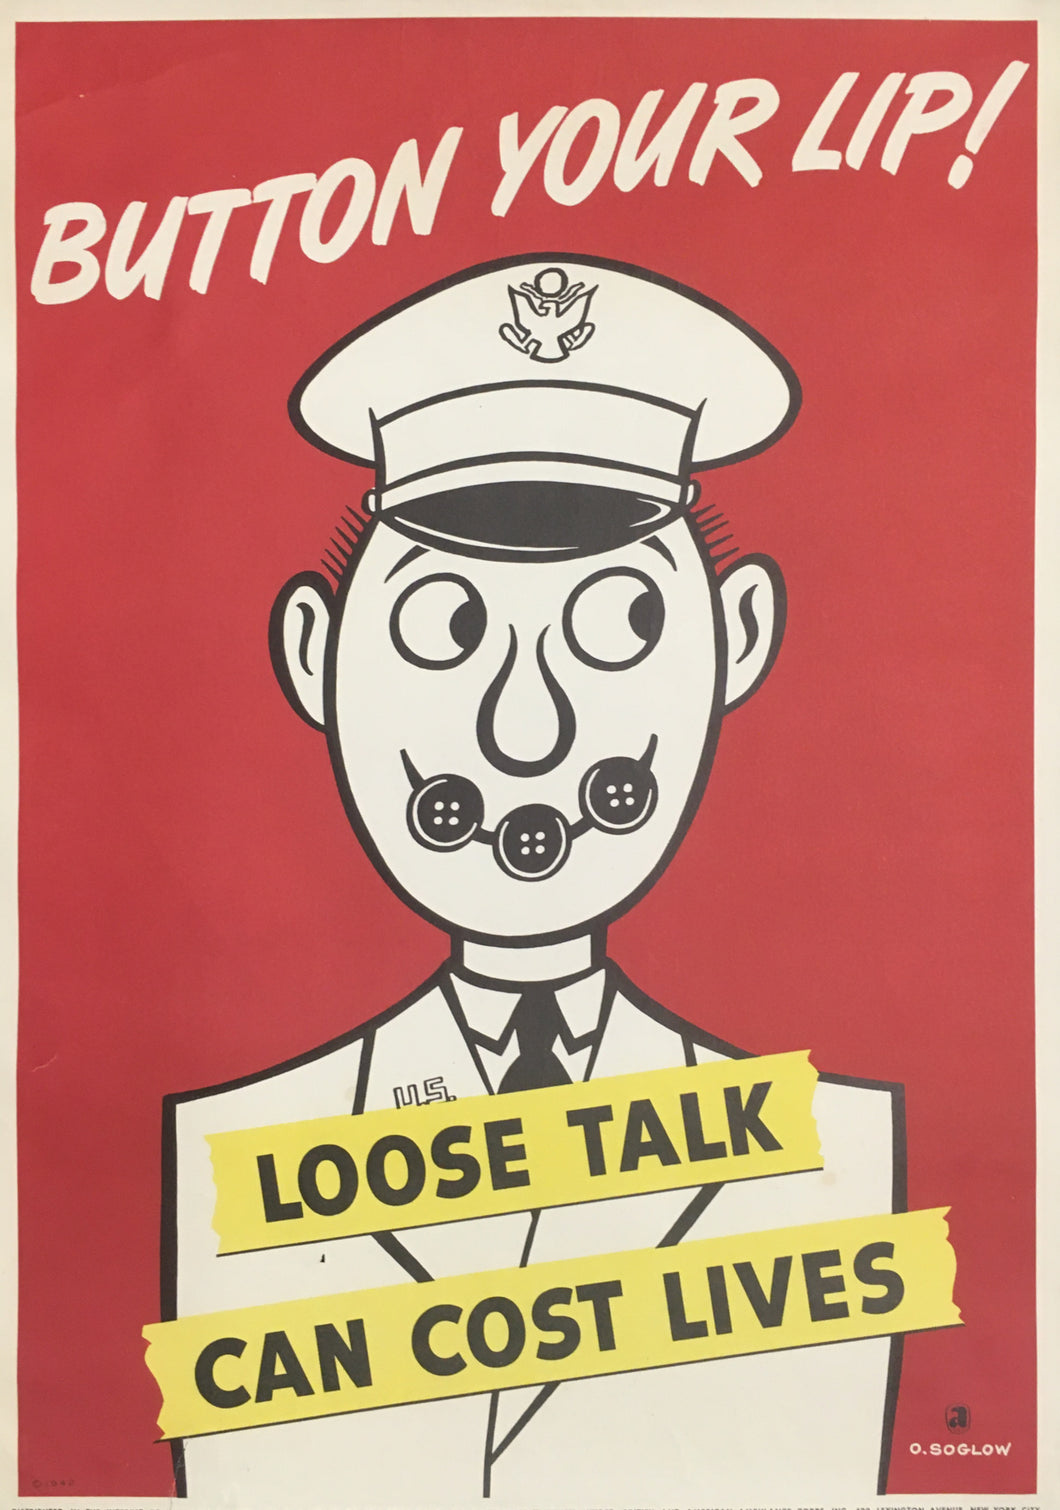 Soglow, Otto “Button Your Lip!  Loose Talk Can Cost Lives”